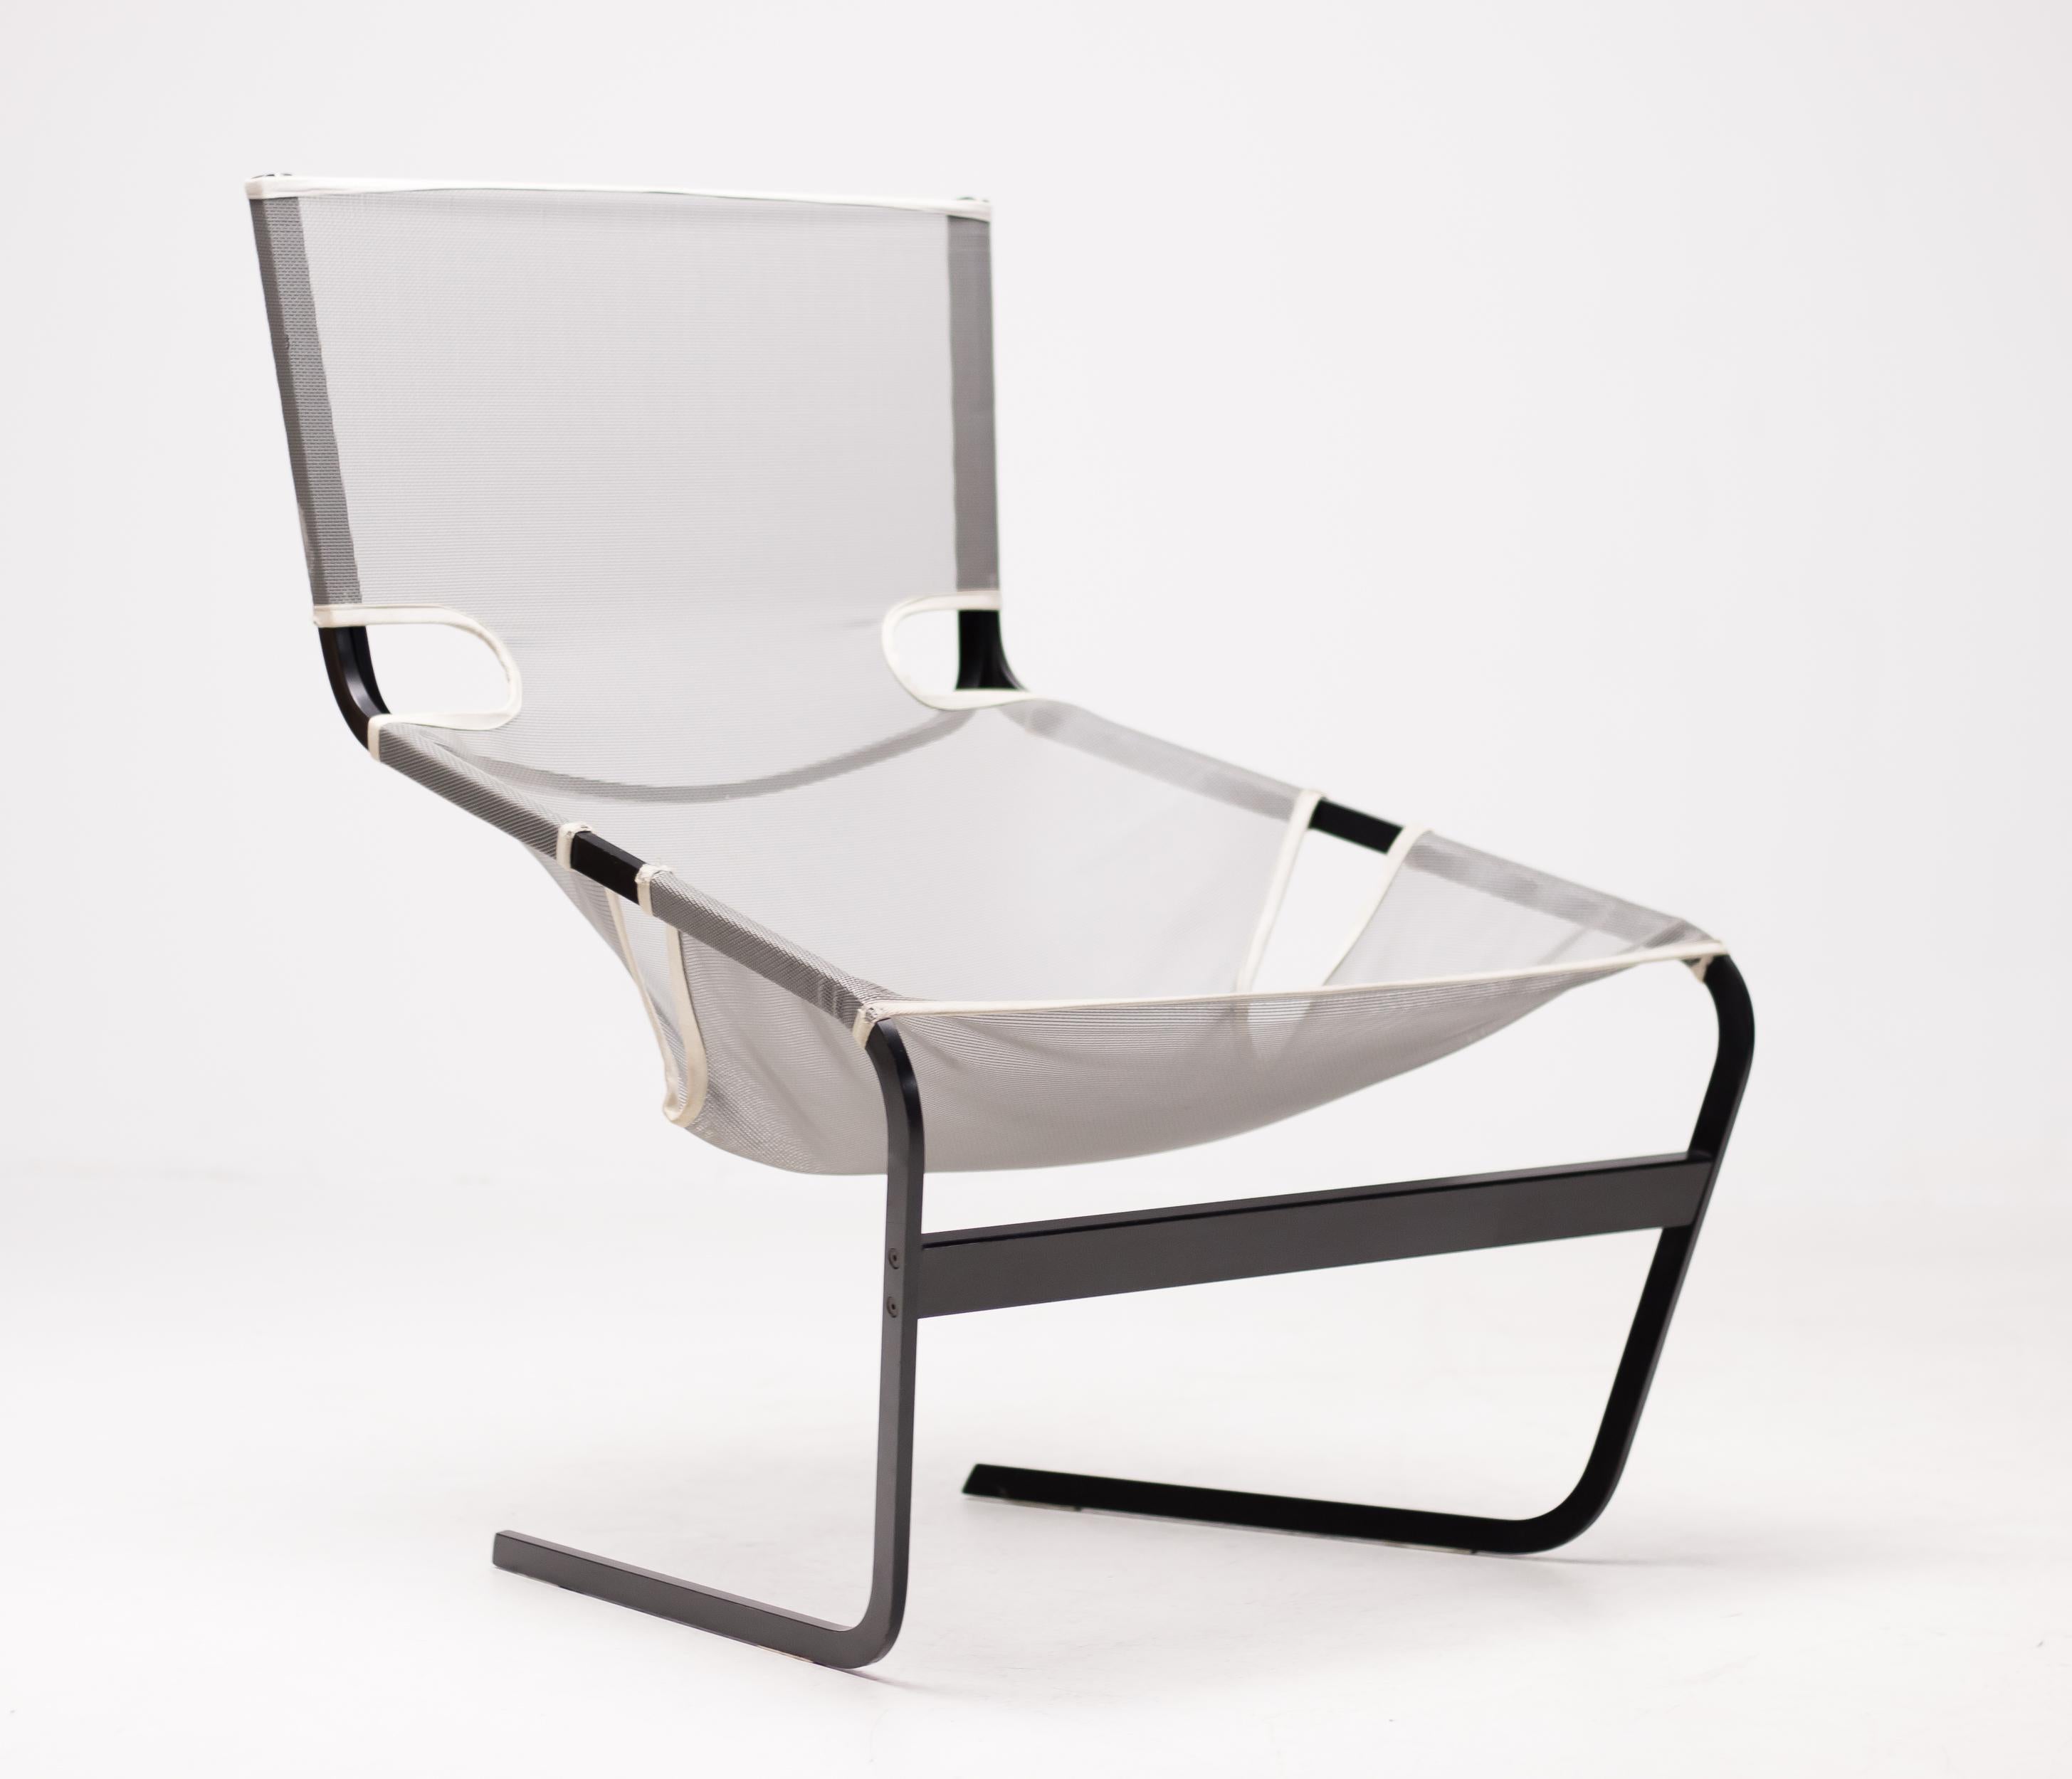 Unusual implementation of this well-known Pierre Paulin design. 
Black metal frame and mesh sling seat.
Marked and labeled. Very comfortable chair!